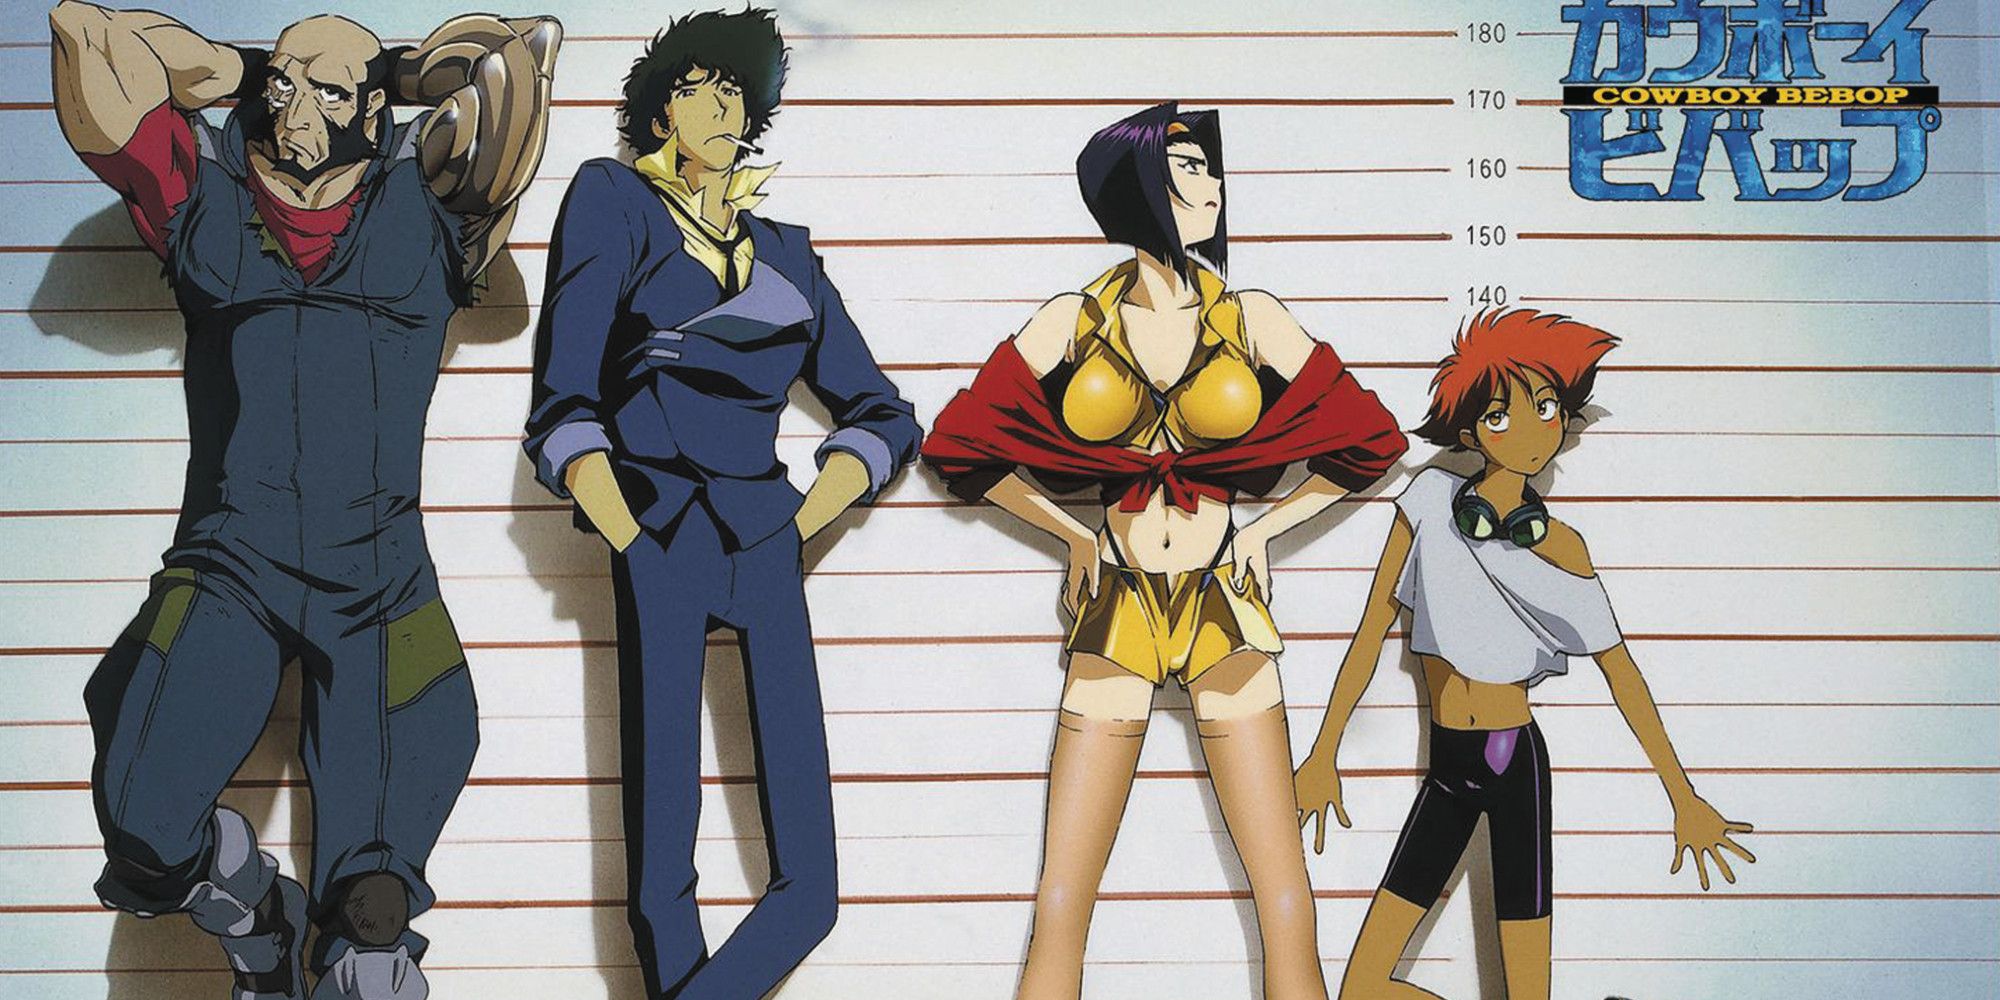 The cast of Cowboy Bebop stand in a police lineup.